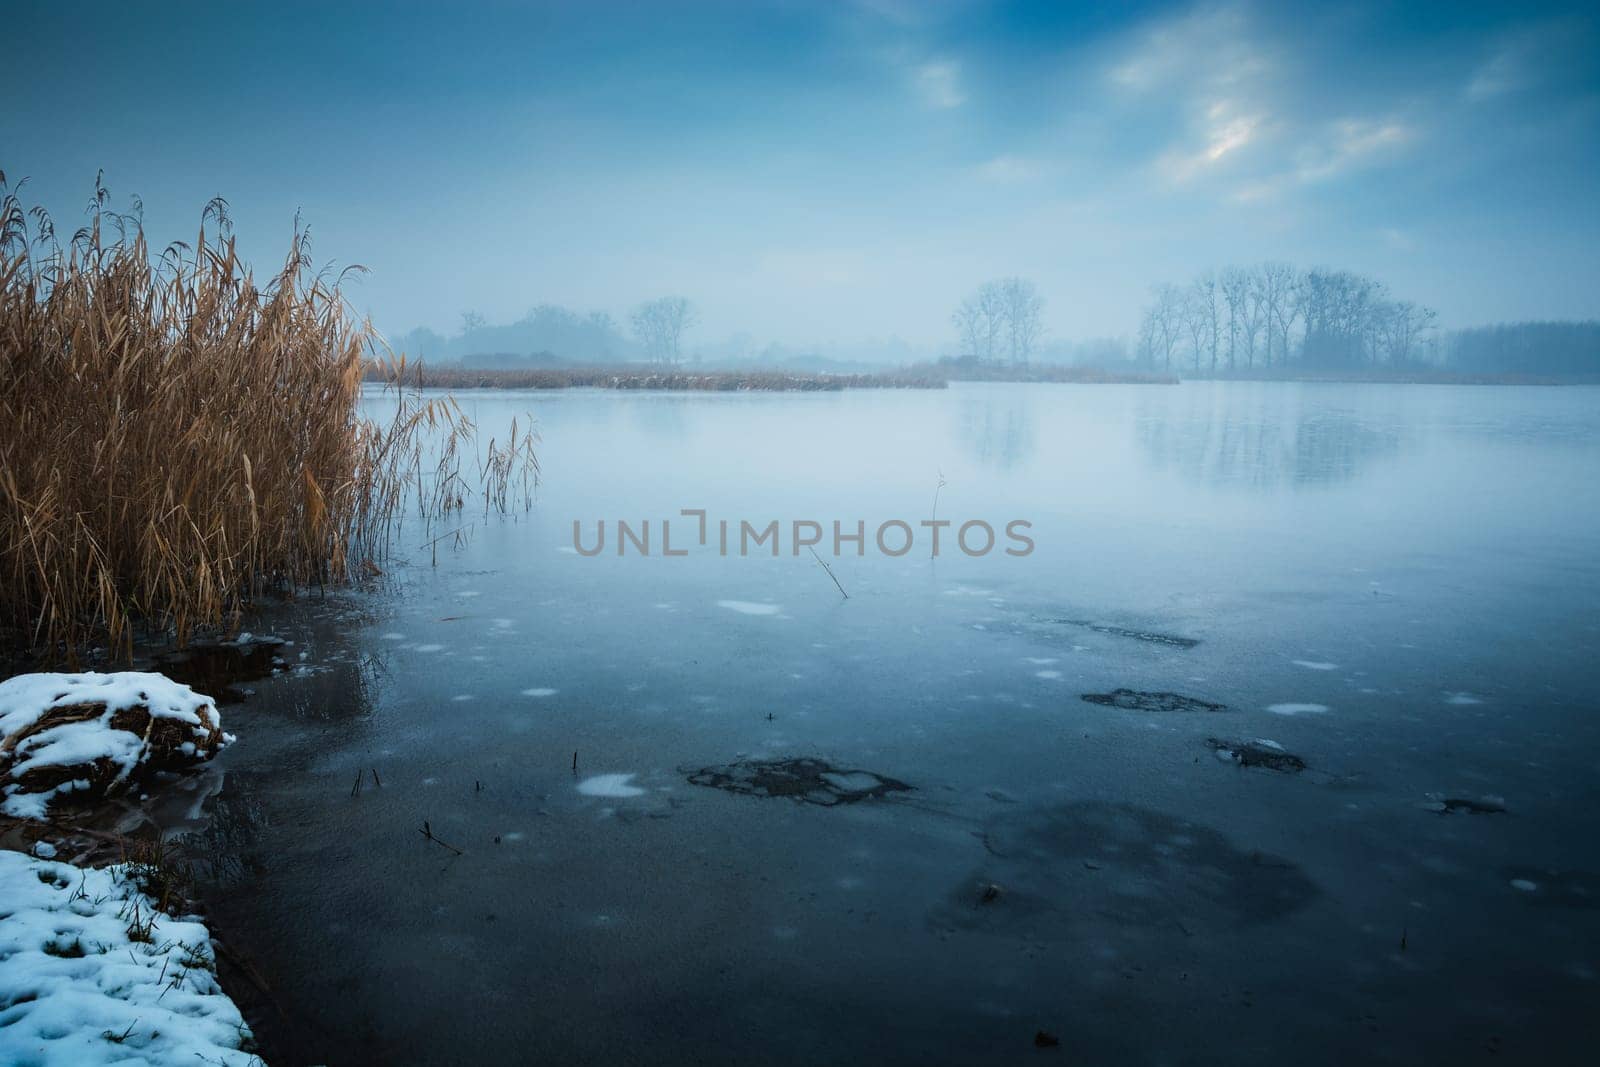 Winter landscape with a view of the shore of a frozen lake on a foggy day by darekb22